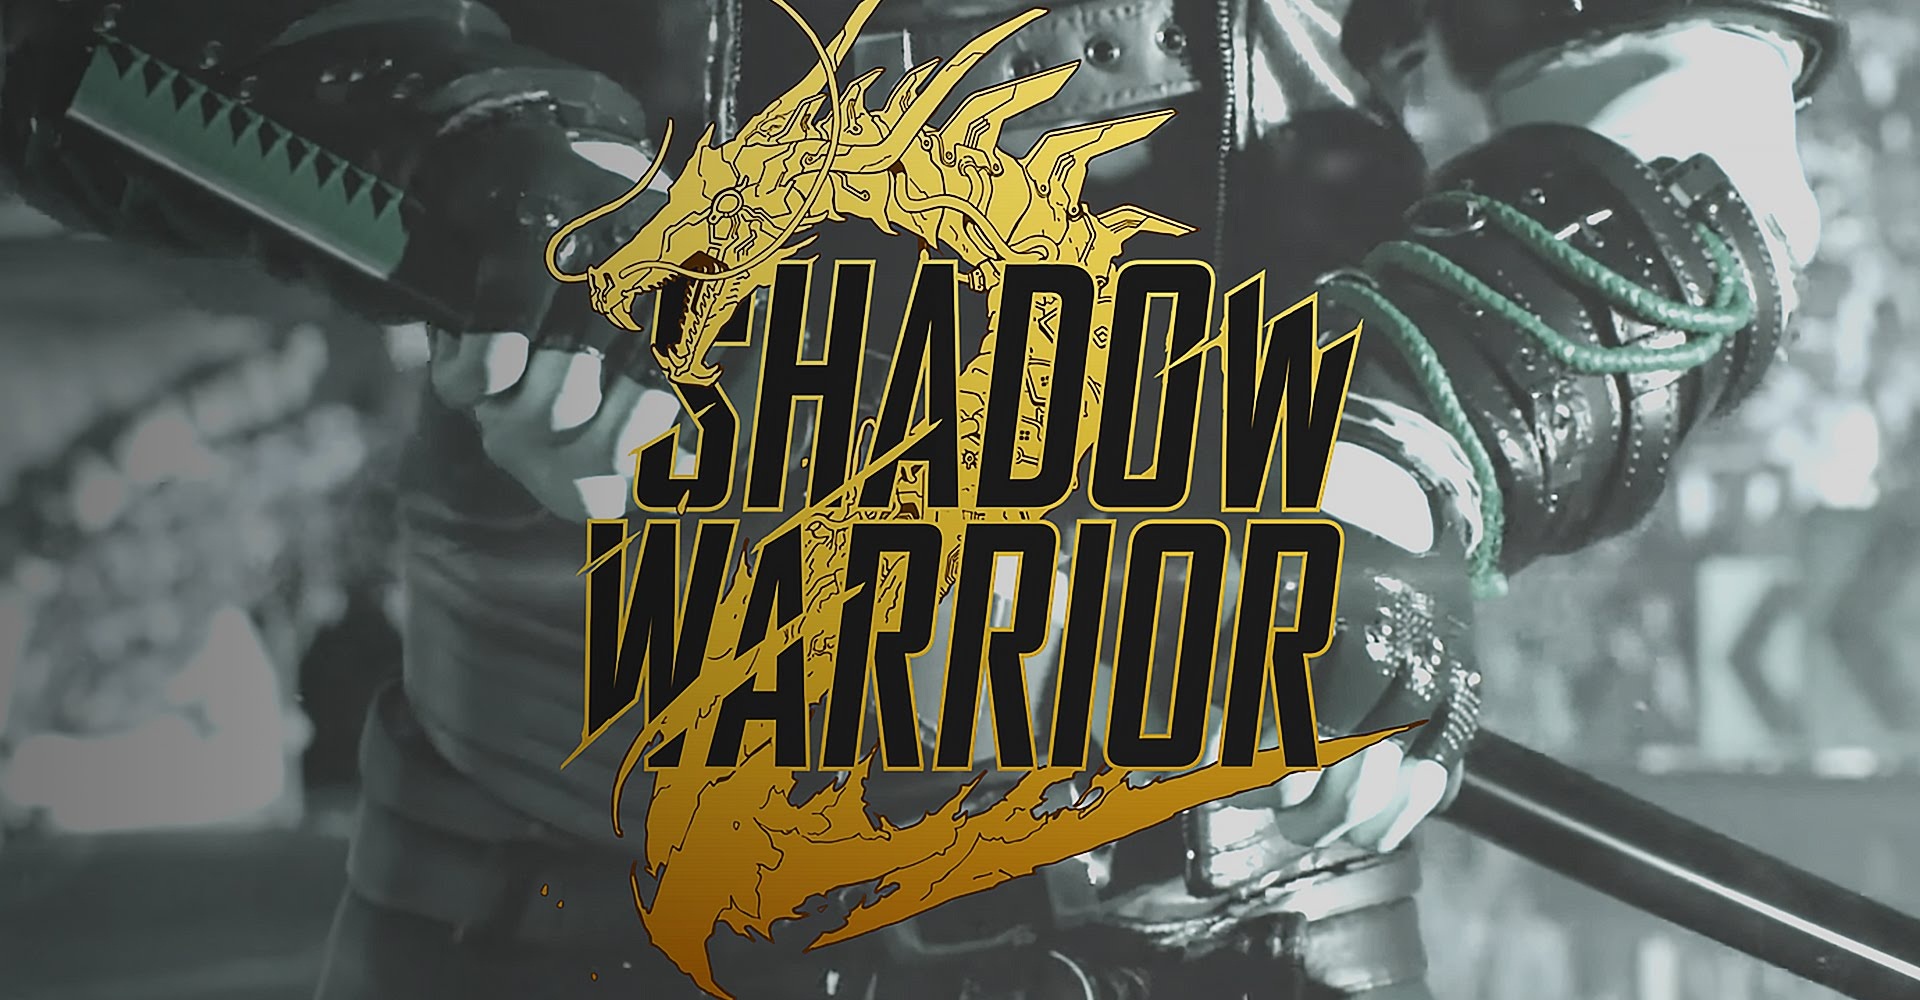 download shadow warrior 2 xbox series x for free